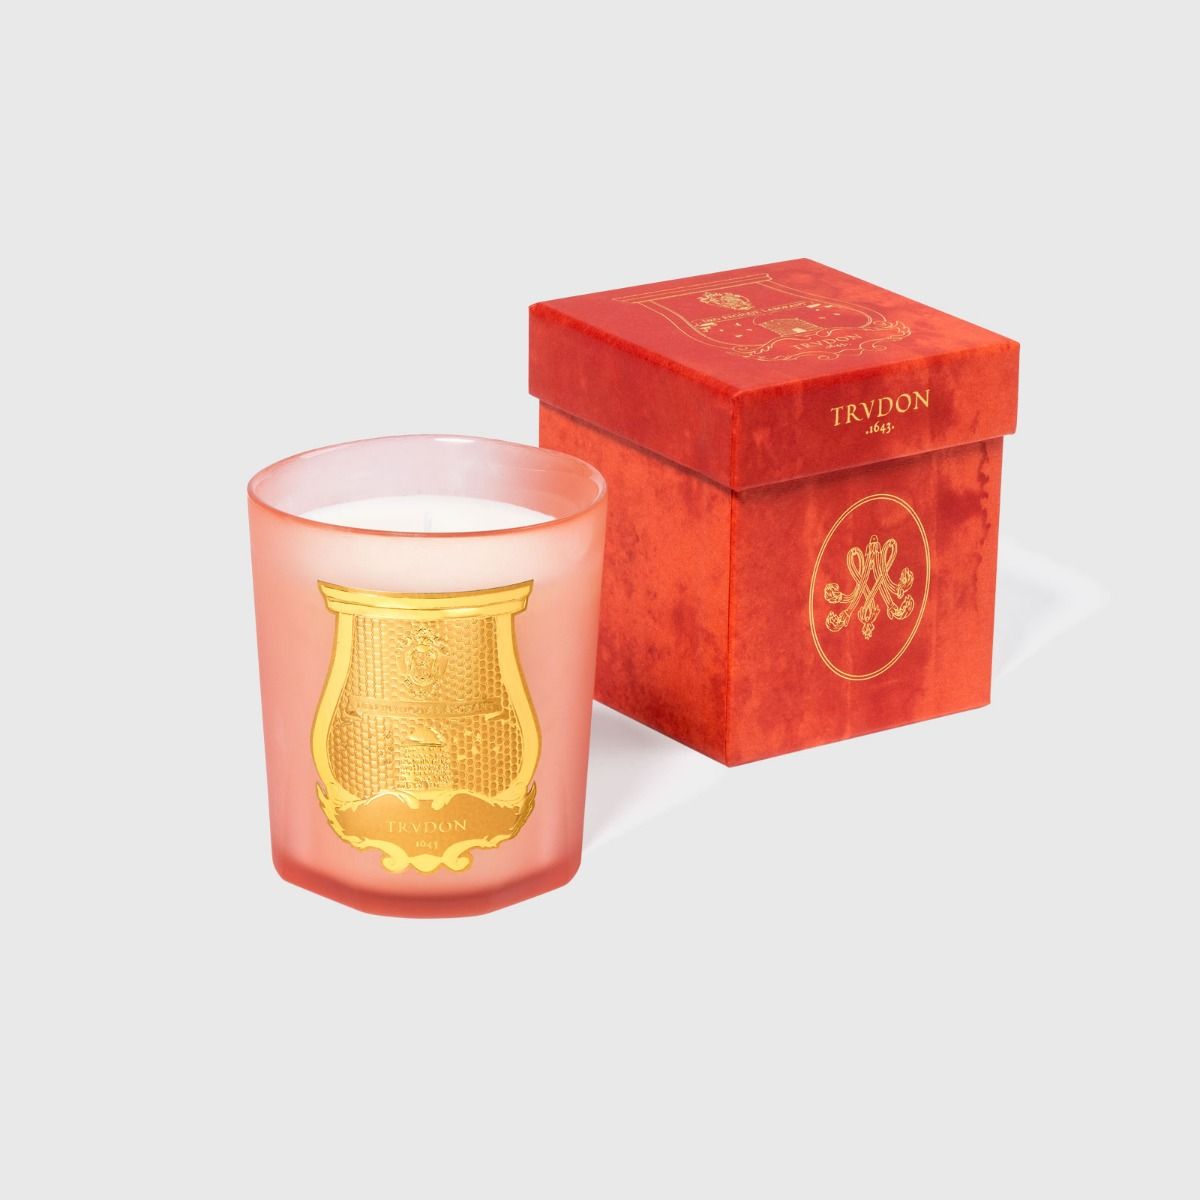 TUILERIES CLASSIC CANDLE - 270 G - TRUDON